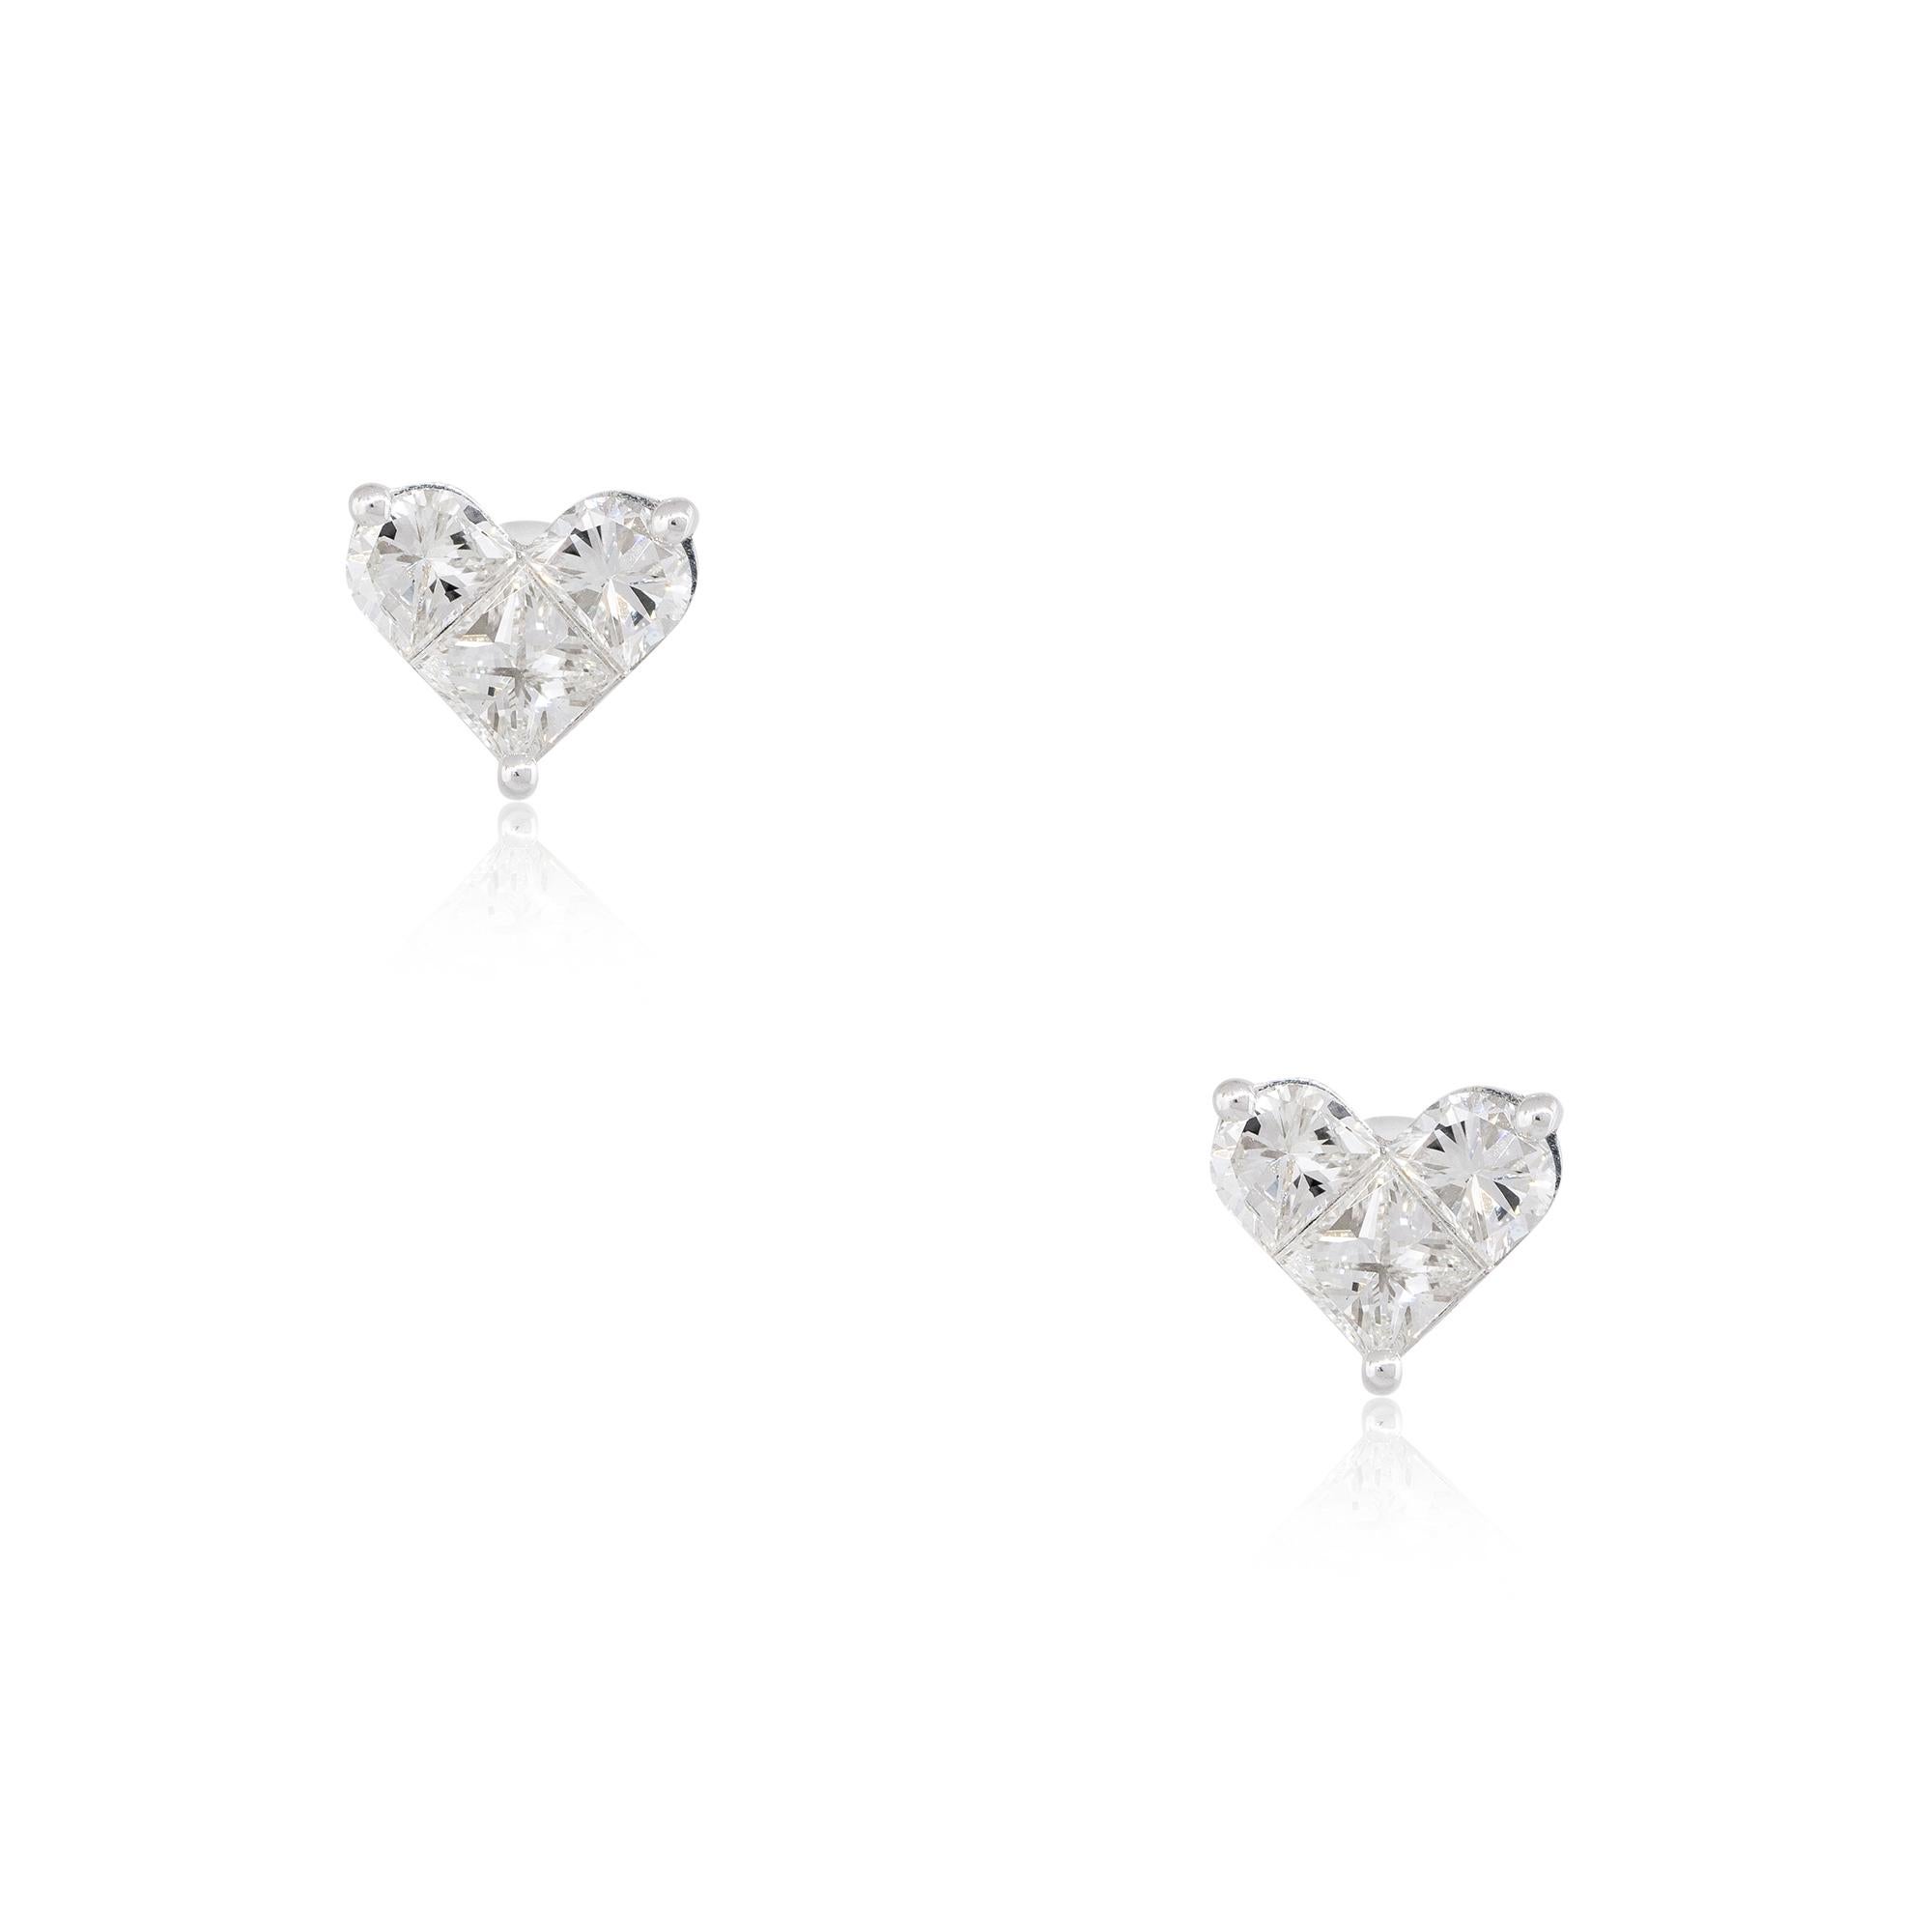 18k White Gold 1.42ctw Princess Cut Diamond Heart-Shaped Earrings

Product: Princess cut Diamond Heart Shaped Earrings
Material: 18k White Gold
Diamond Details: There are approximately 1.42 carats of Princess cut diamonds (6 stones, 3 in each